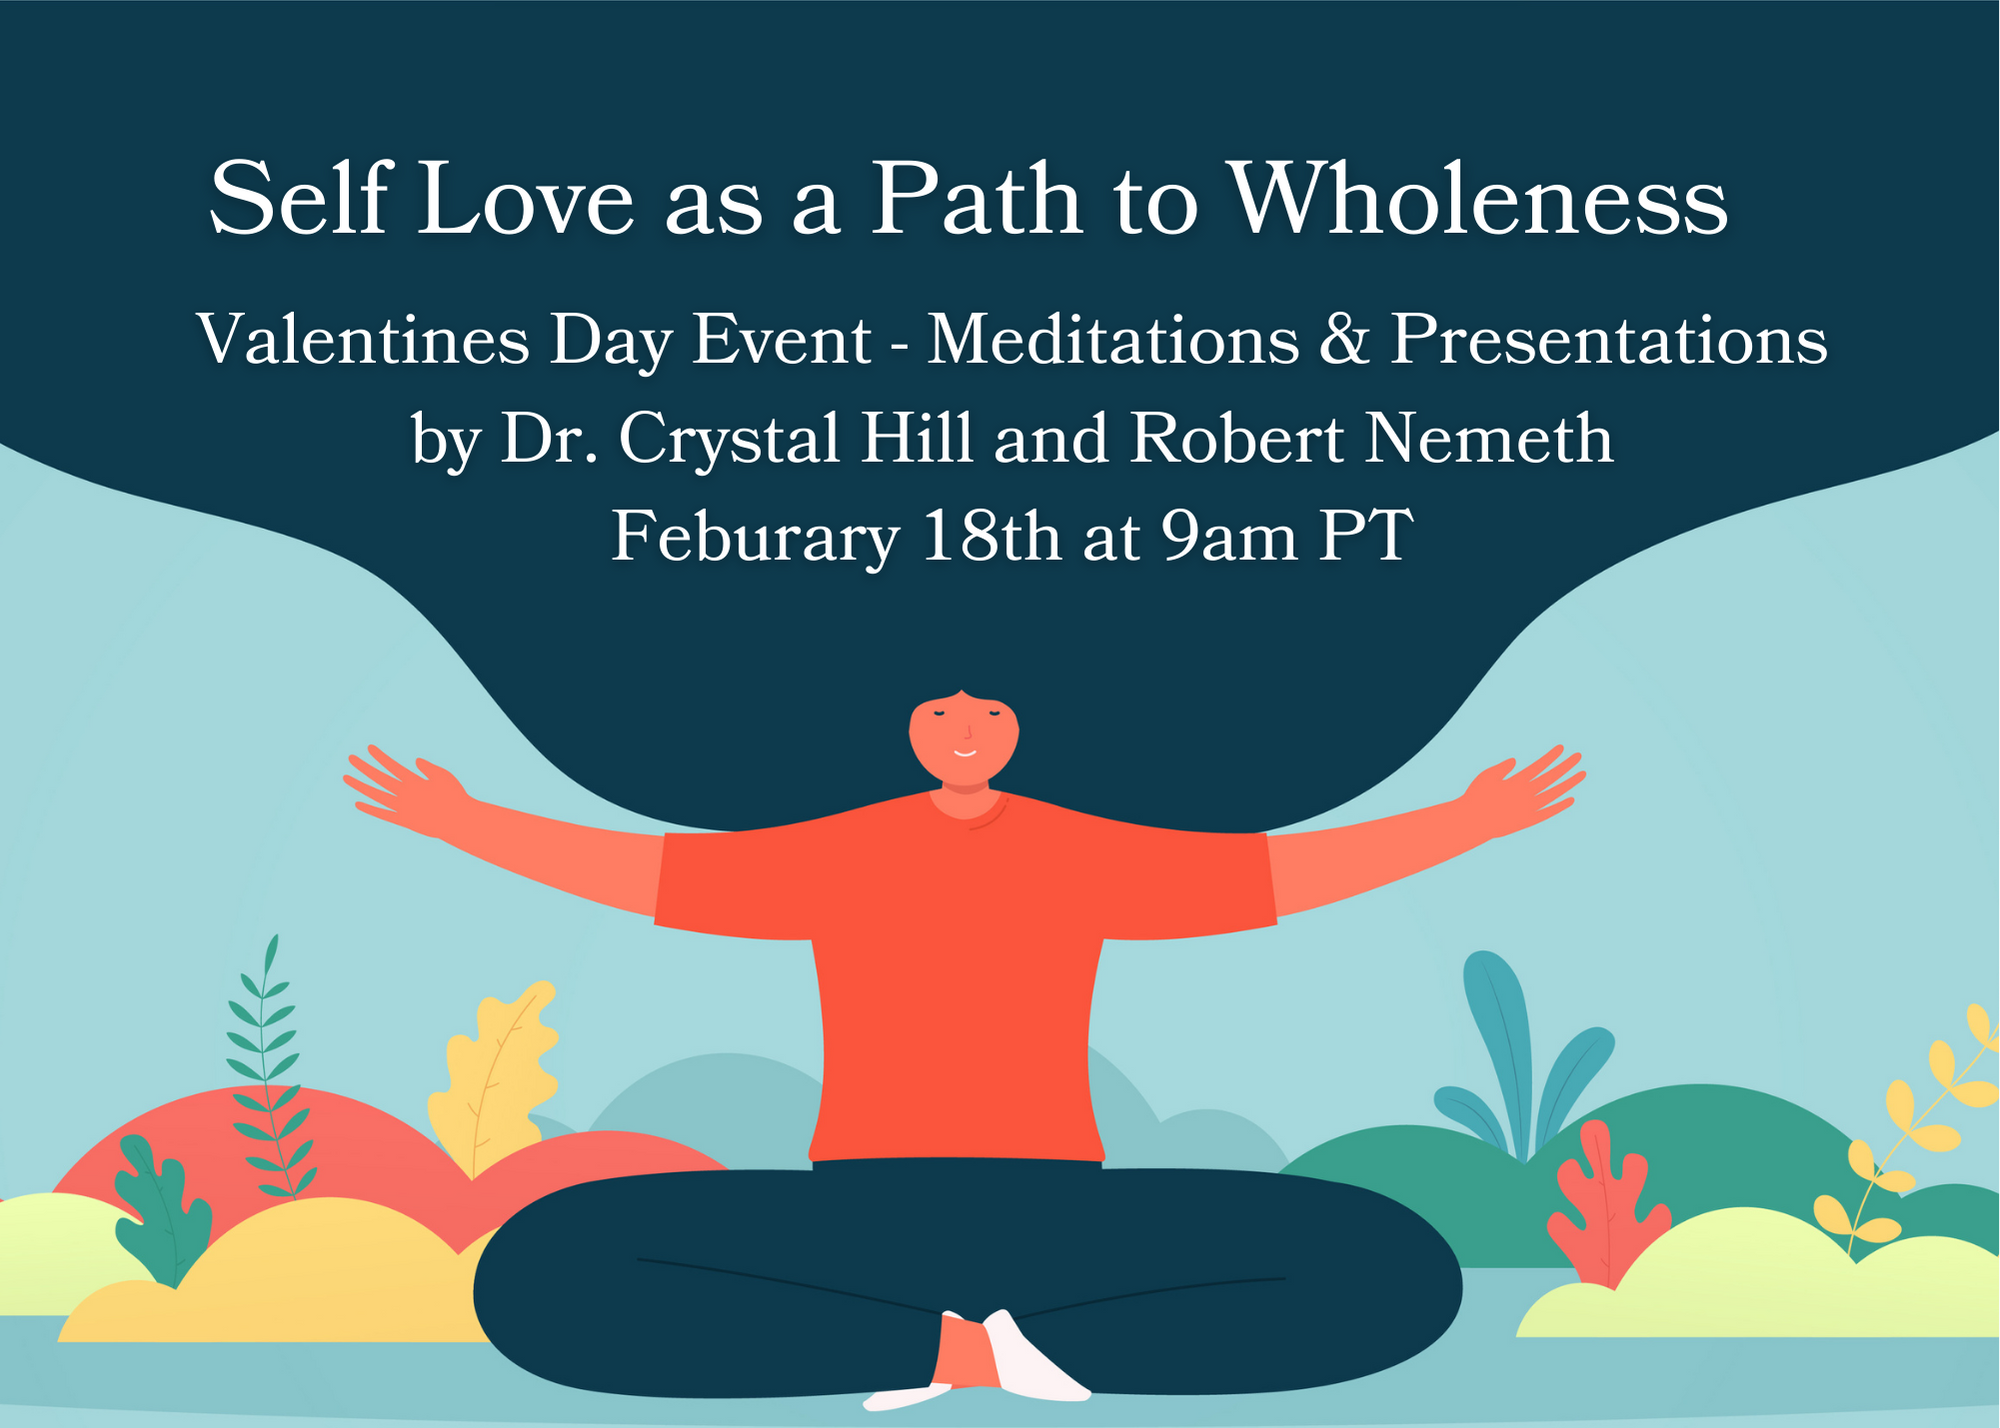 Self Love as a Path to Wholeness